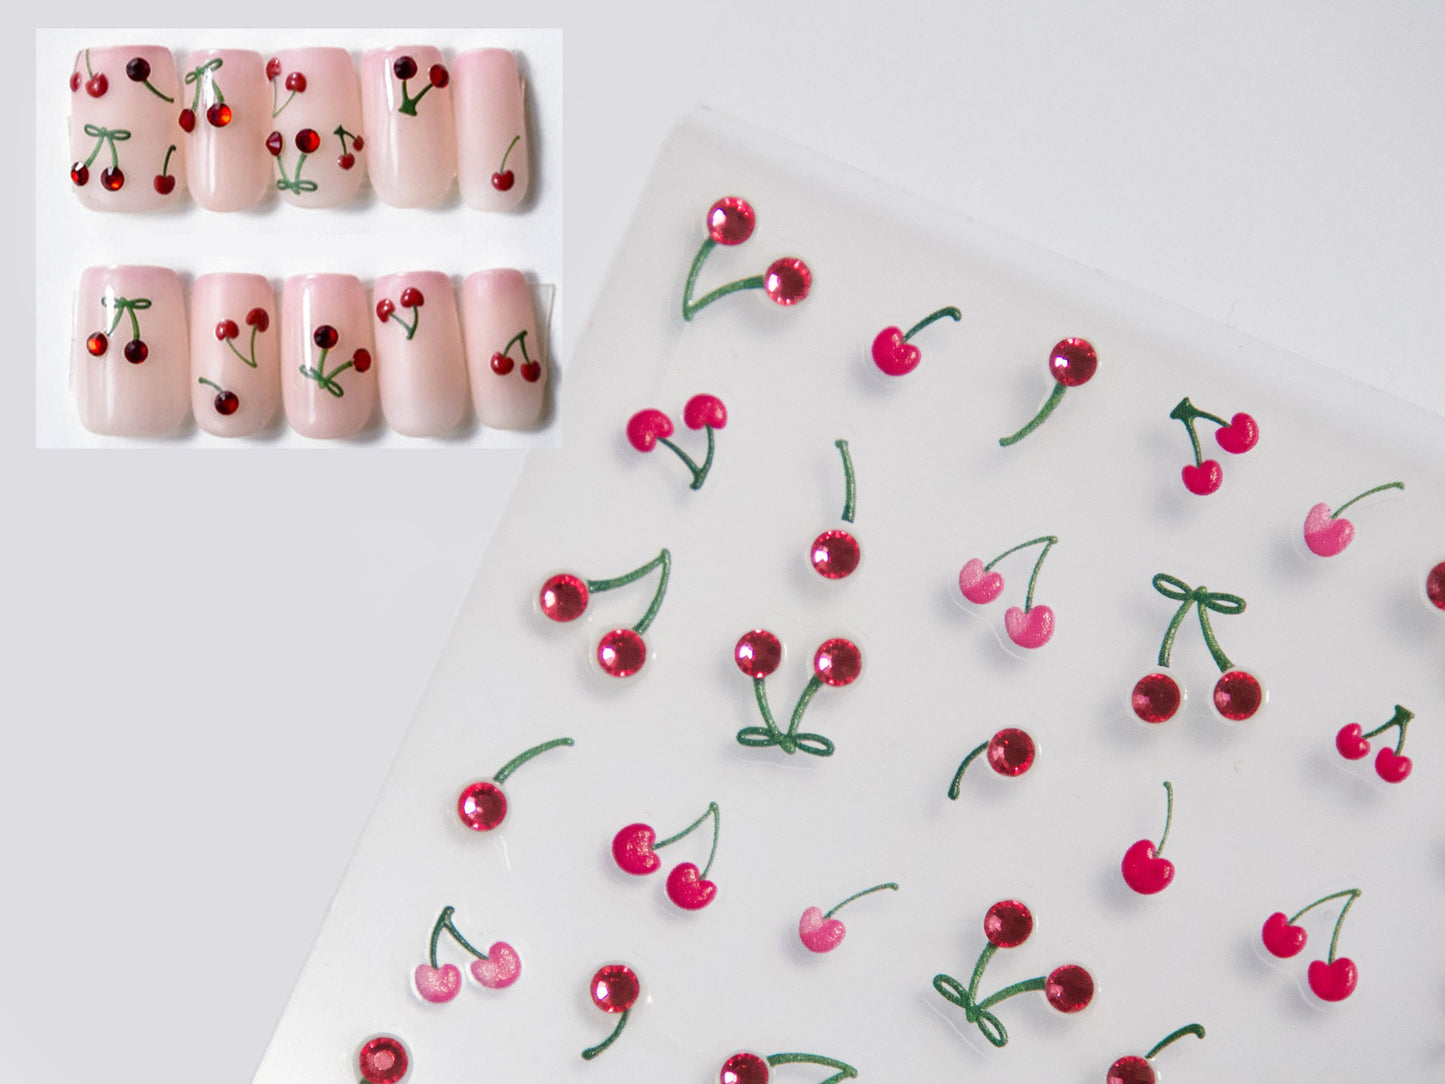 Red Cherry Fruity Nail Art Sticker/ 3D fruits DIY Tips Guides peel off  Stickers/Rhinestone Cherries Yellow Banana fruit nail decal